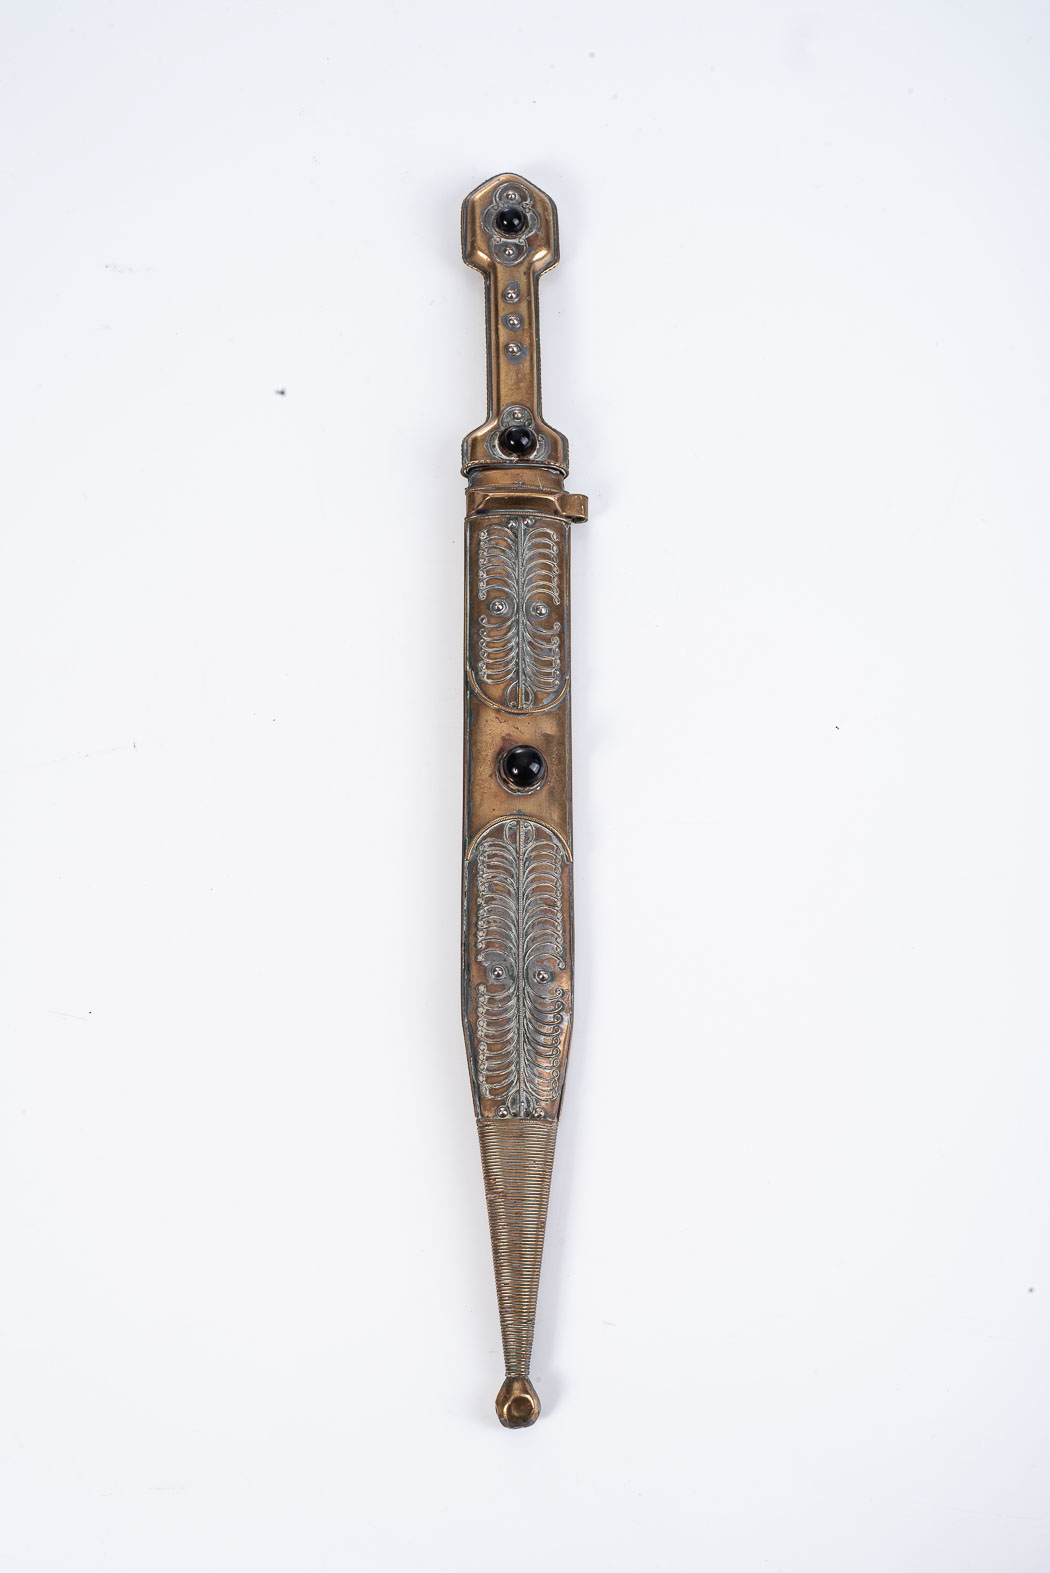 KINJAL CAUCASIAN RUSSIAN DAGGER Caucasian kinjal with scabbard (beautifully finished, nice signs